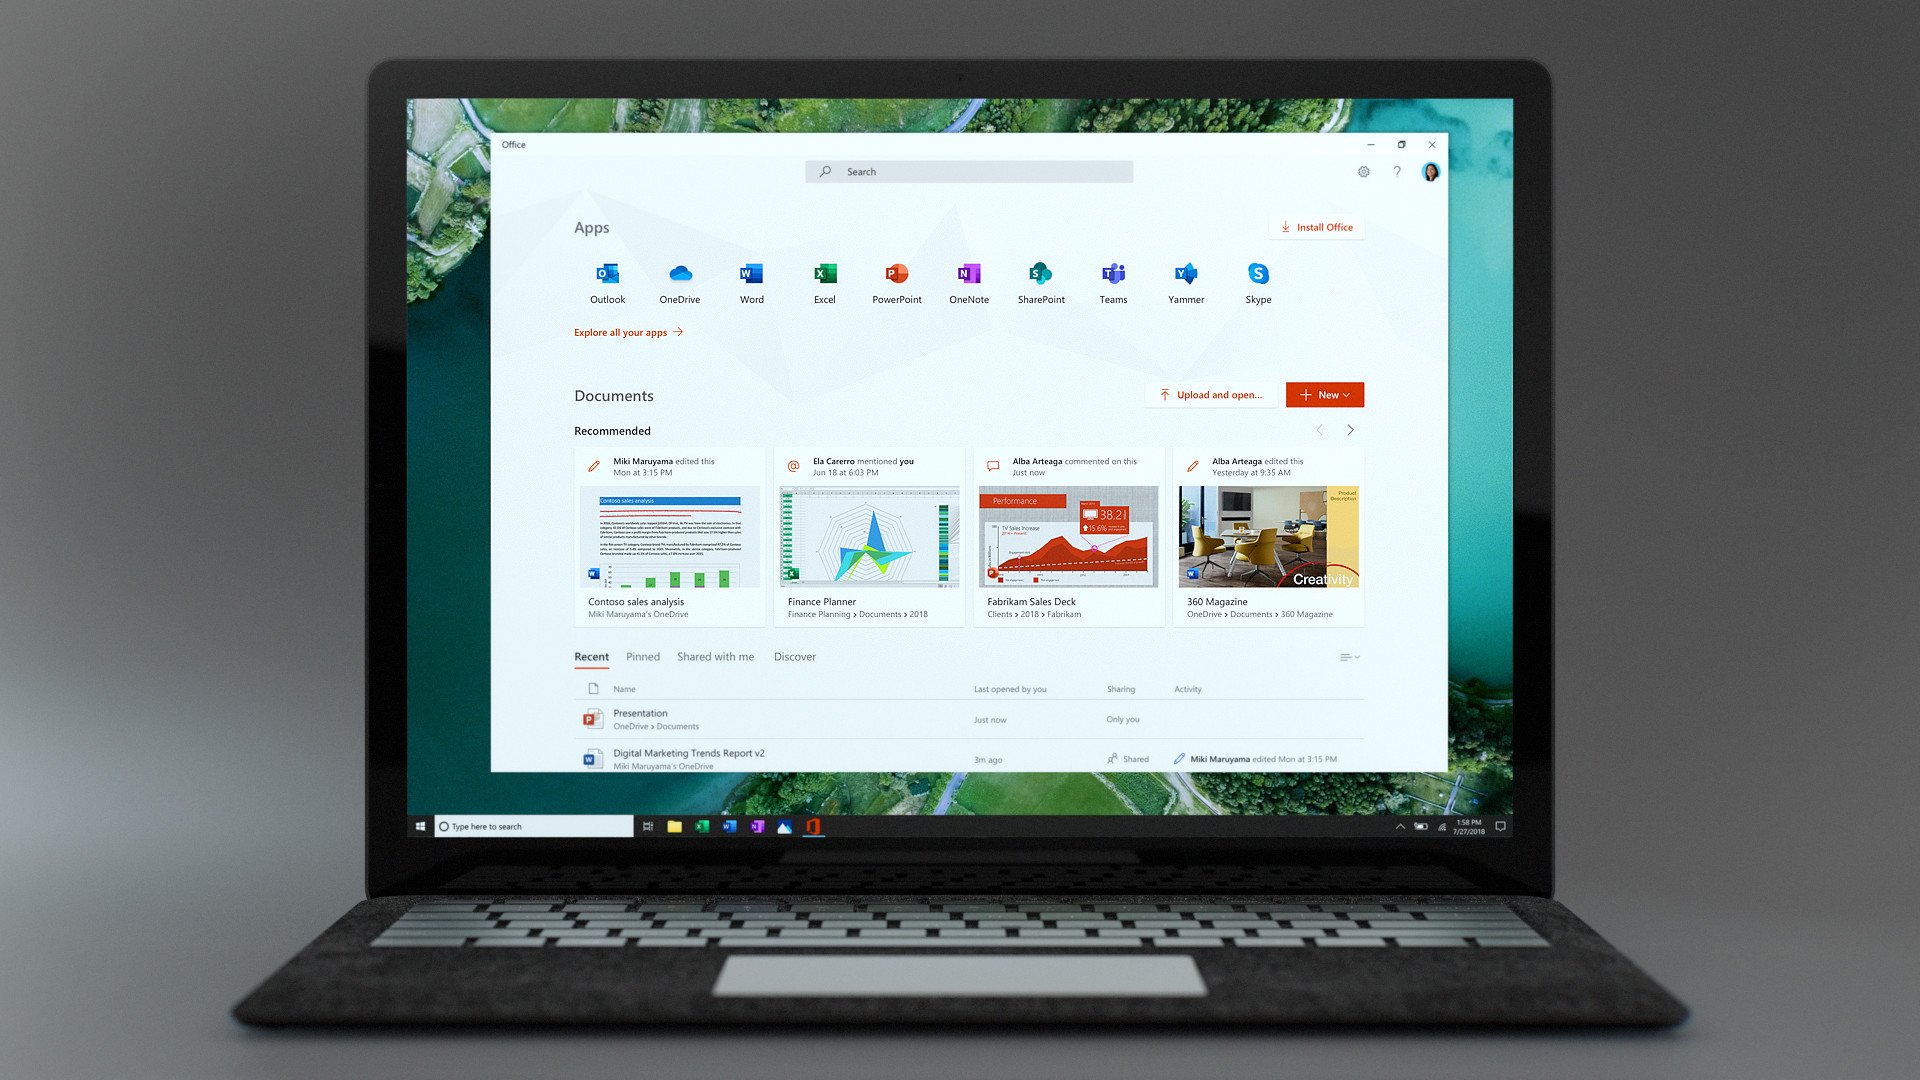 Microsoft has a new Office app for Windows 10, set to replace 'My Office'